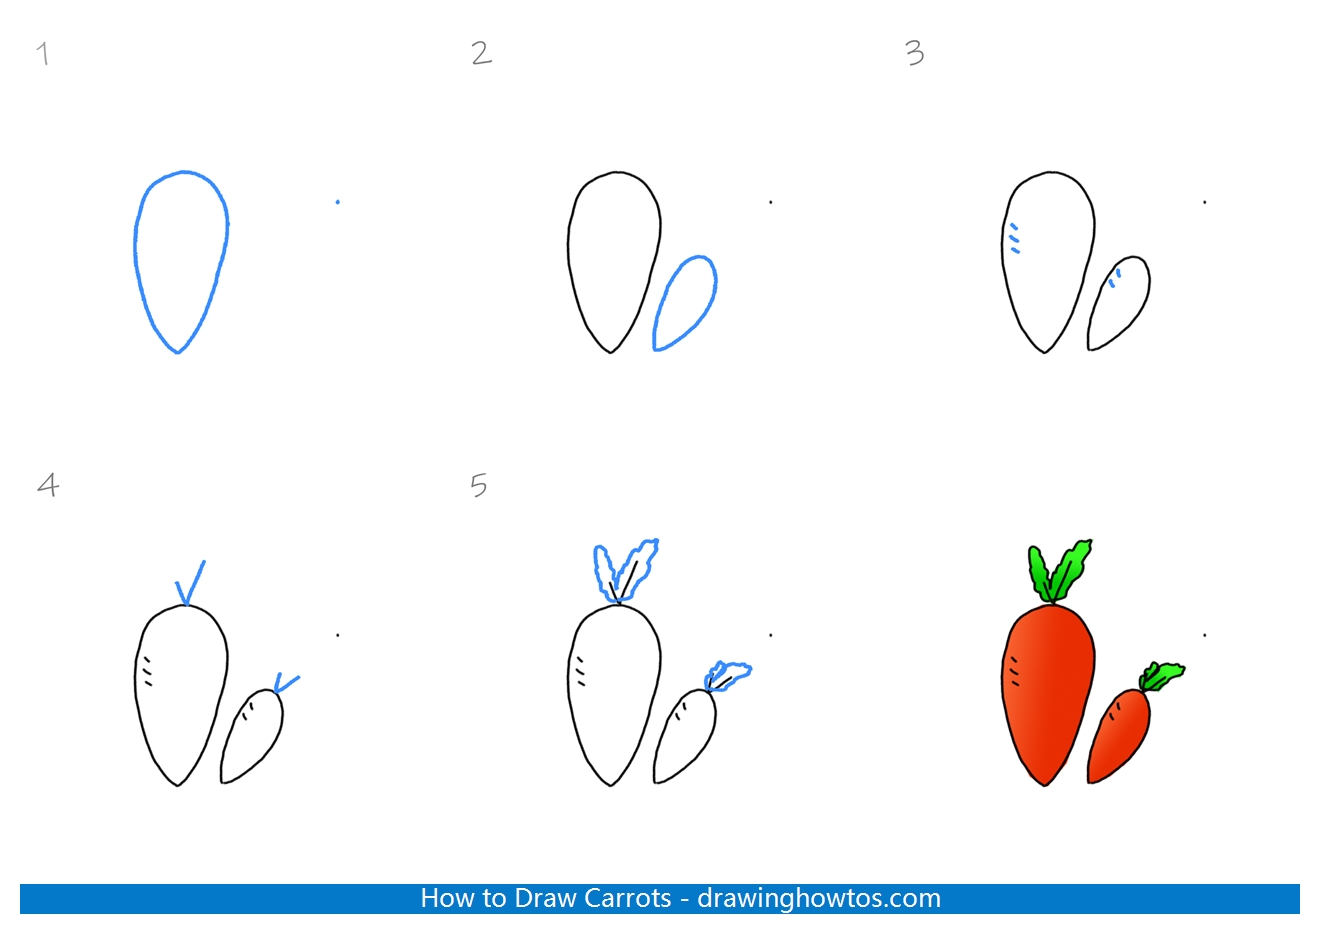 How to Draw Carrots Step by Step